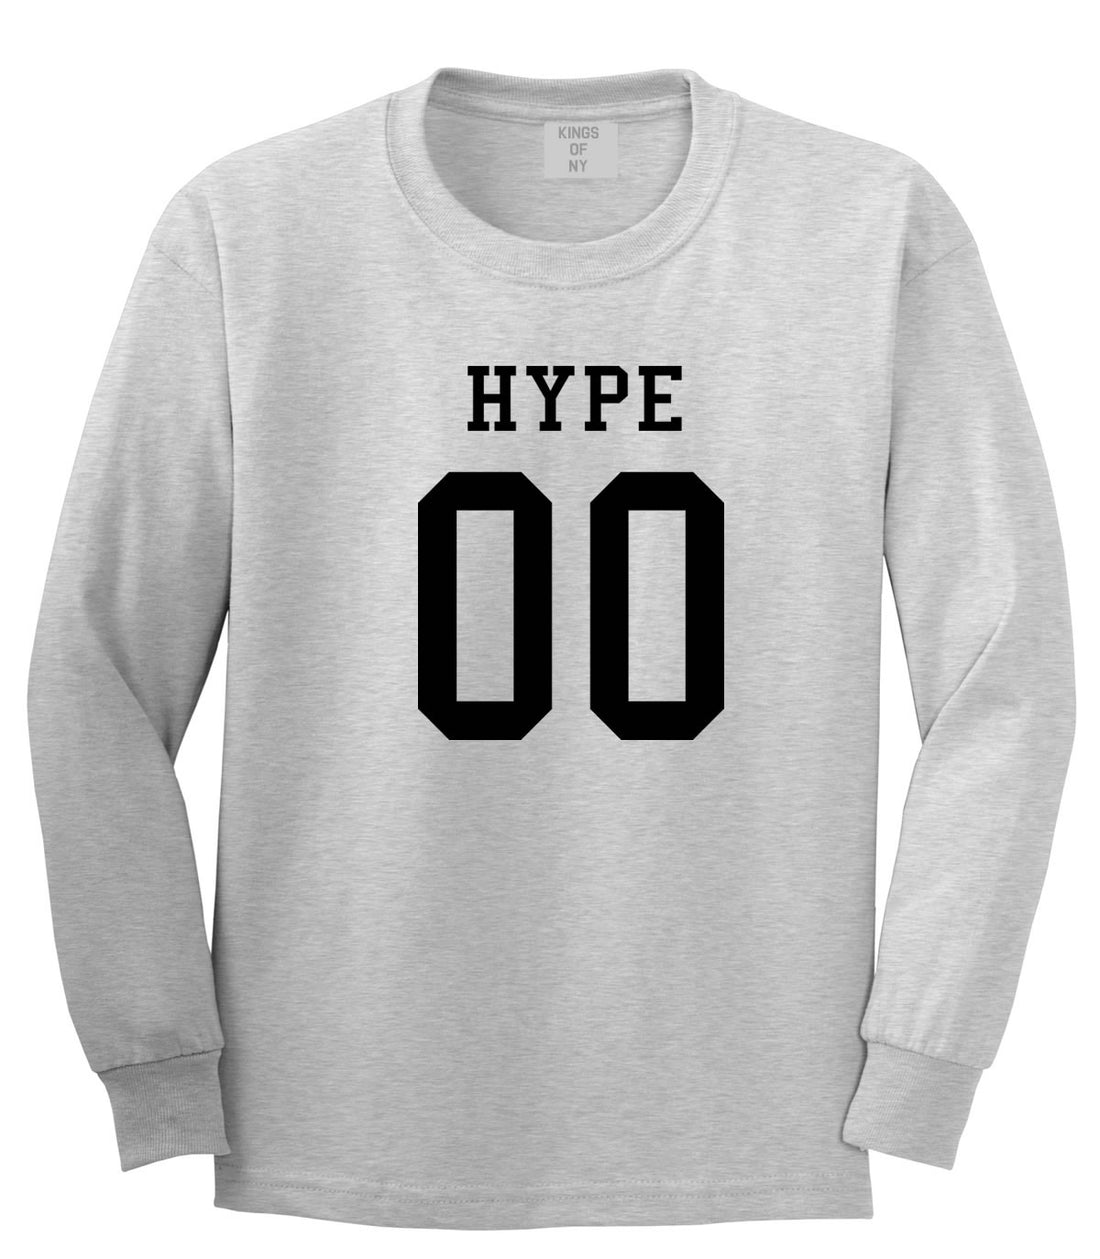 Hype Team Jersey Long Sleeve T-Shirt in Grey By Kings Of NY